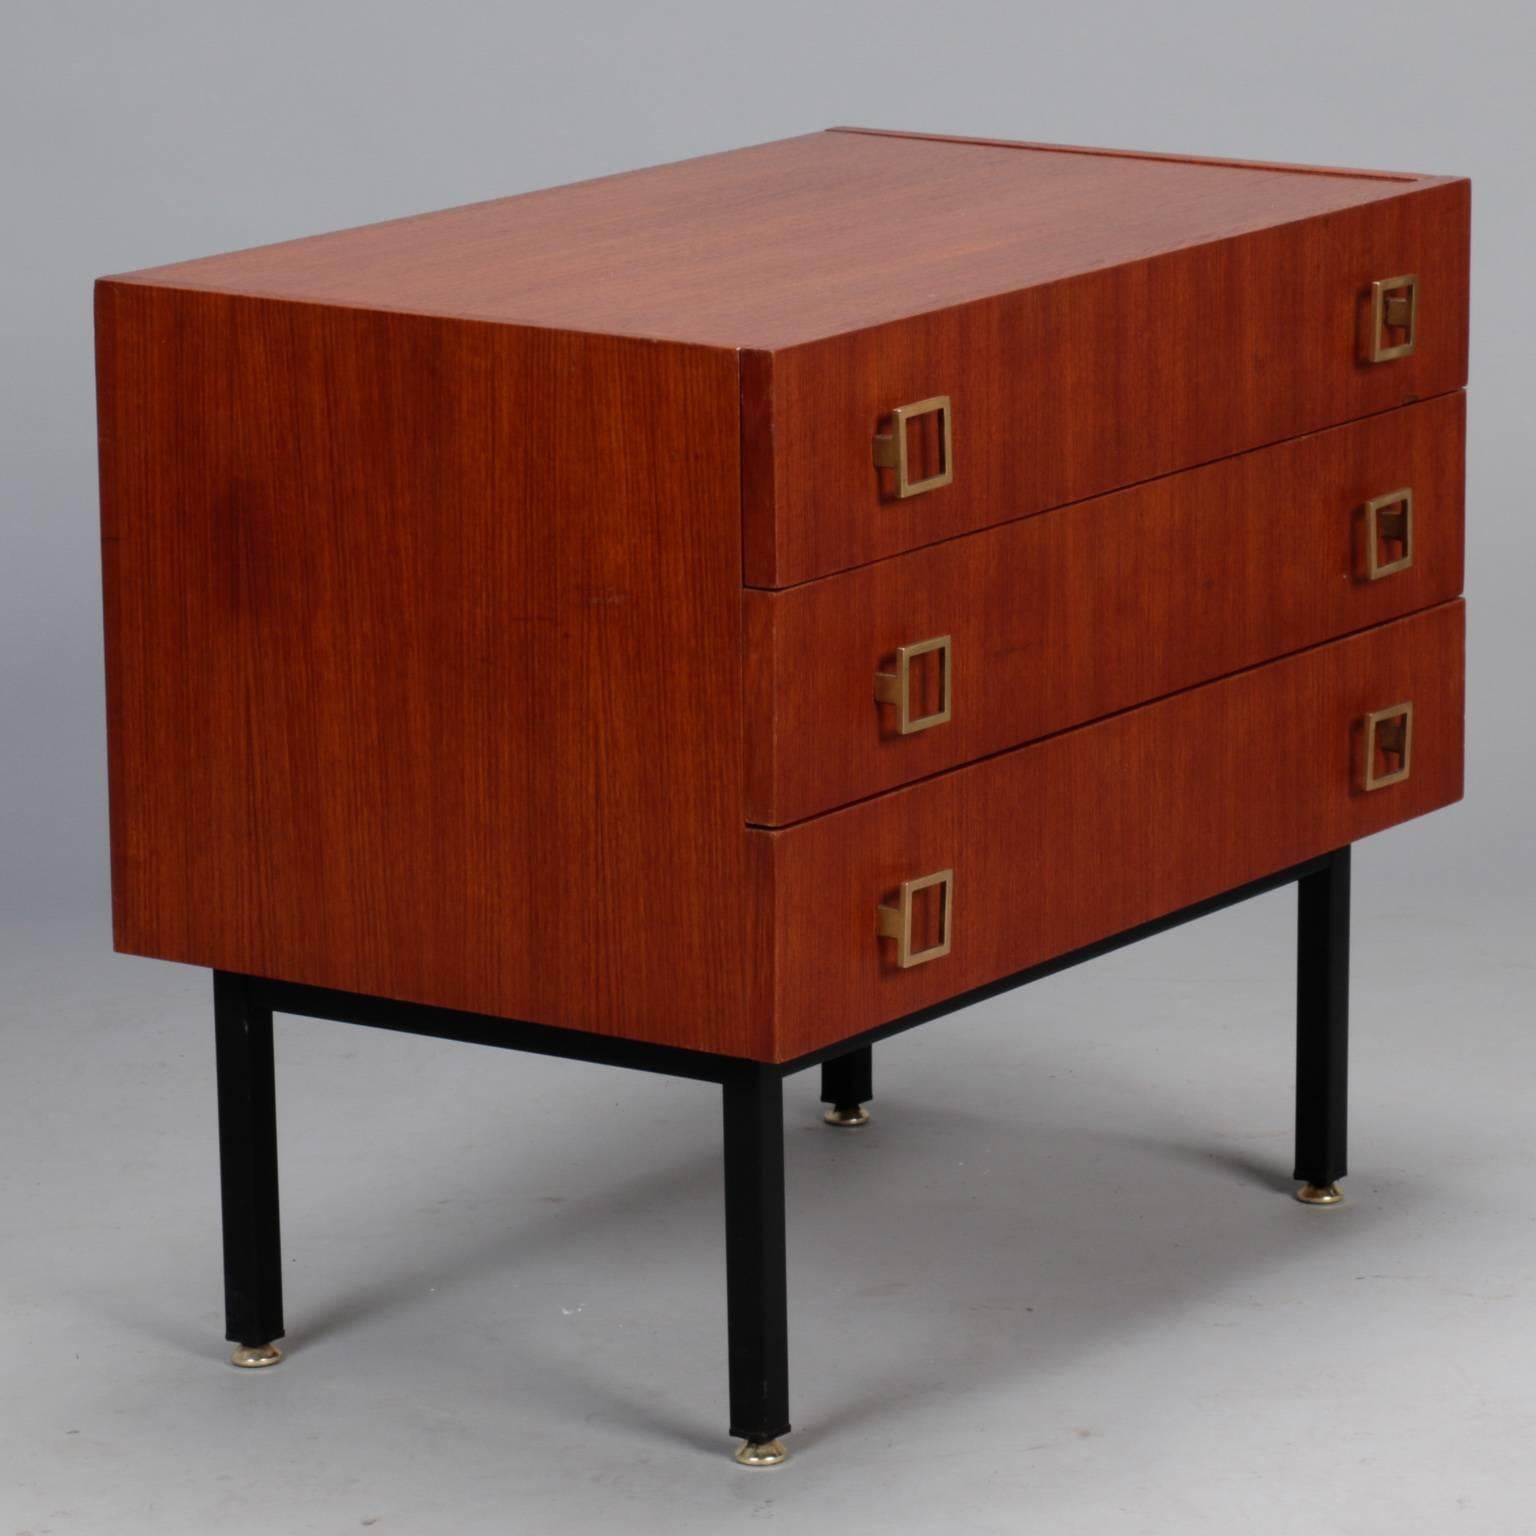 Small French chest of three drawers in mahogany with a streamlined ebonised base and brass feet, circa 1960s. Drawers have dovetail construction and open square-shaped brass pulls.
   